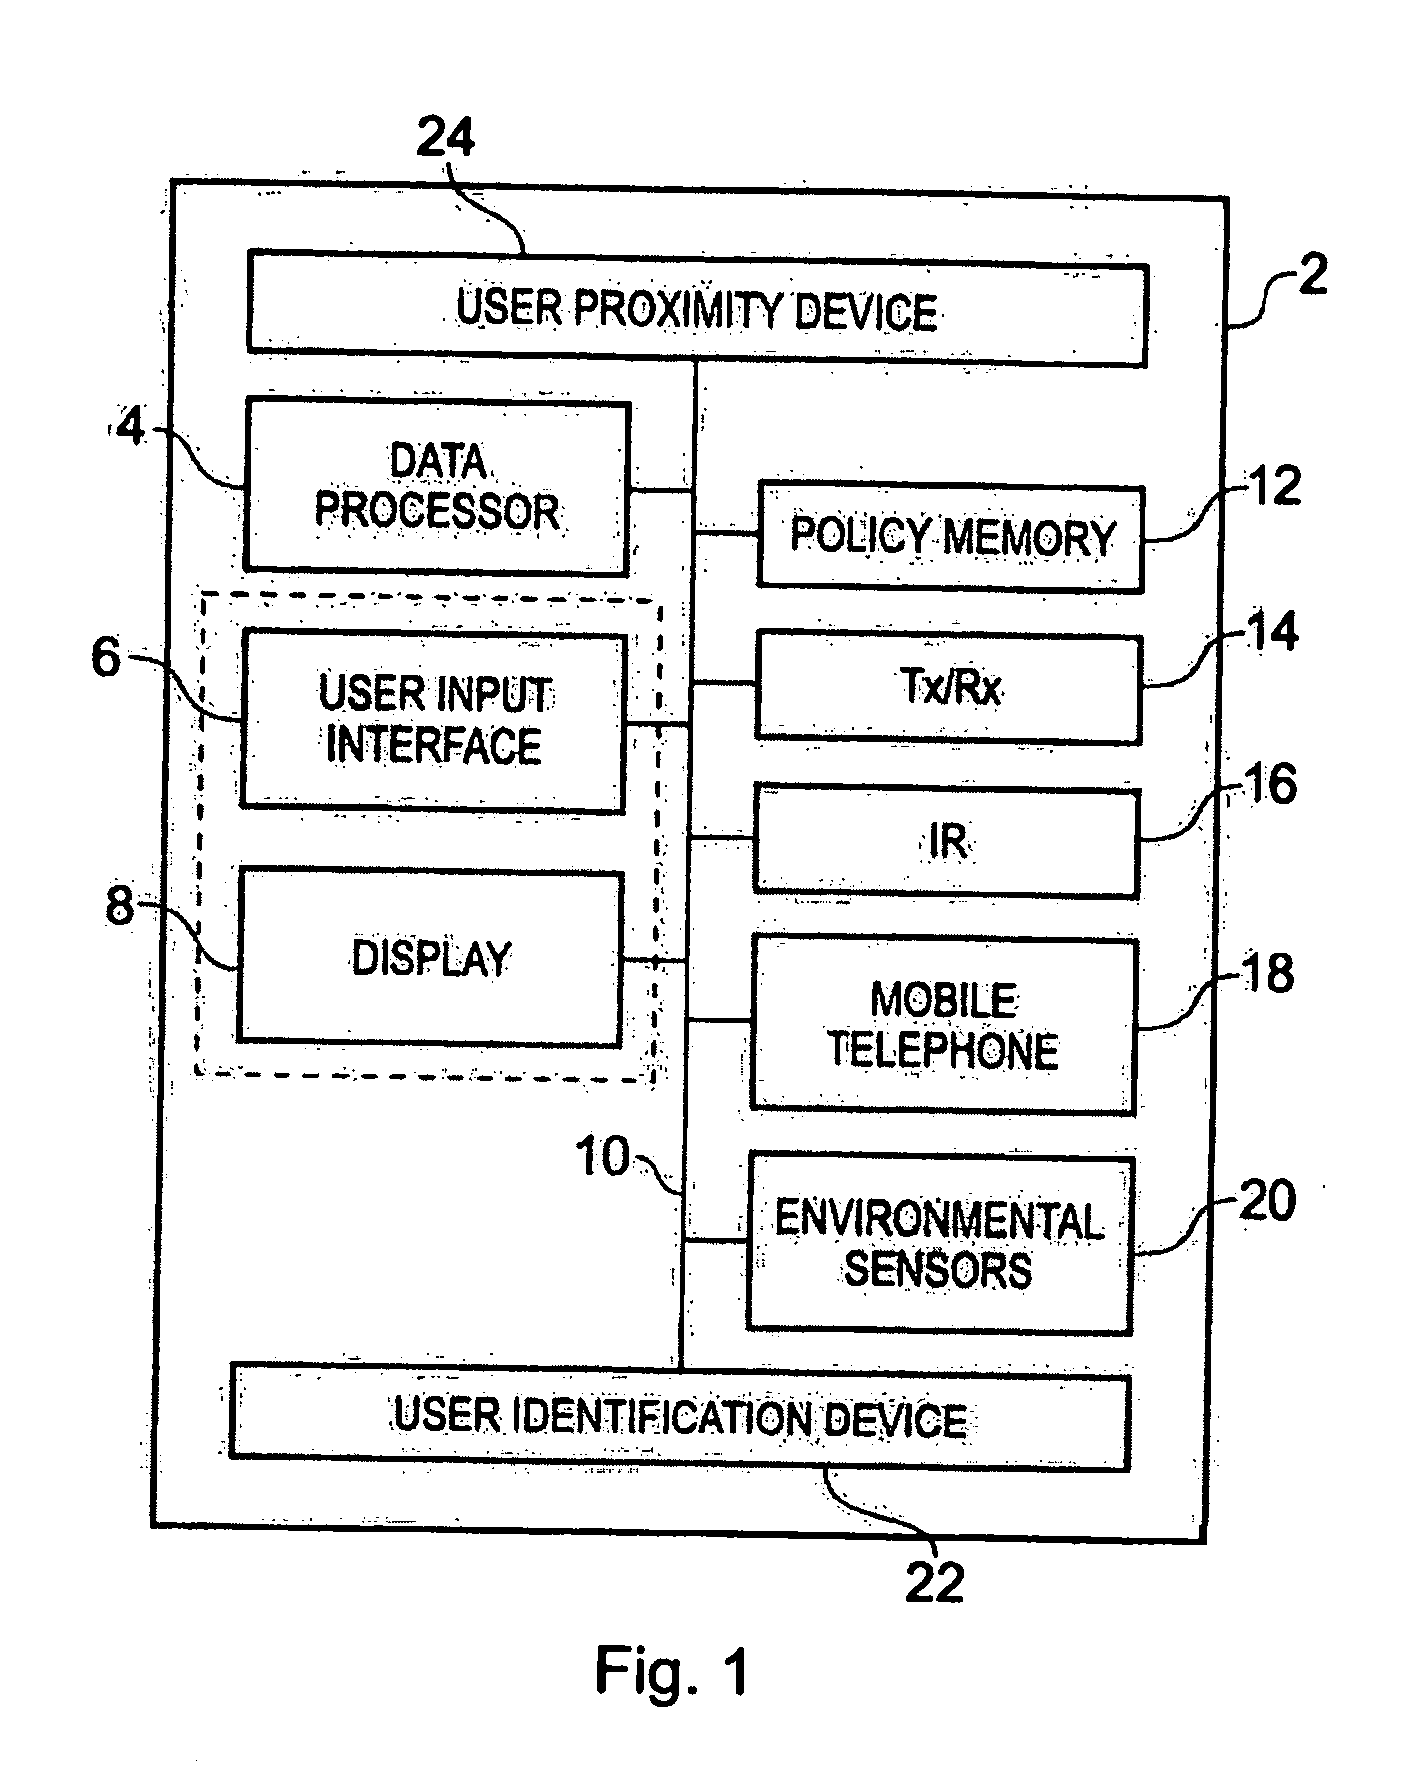 Apparatus for and method of evaluating security within a data processing or transactional environment